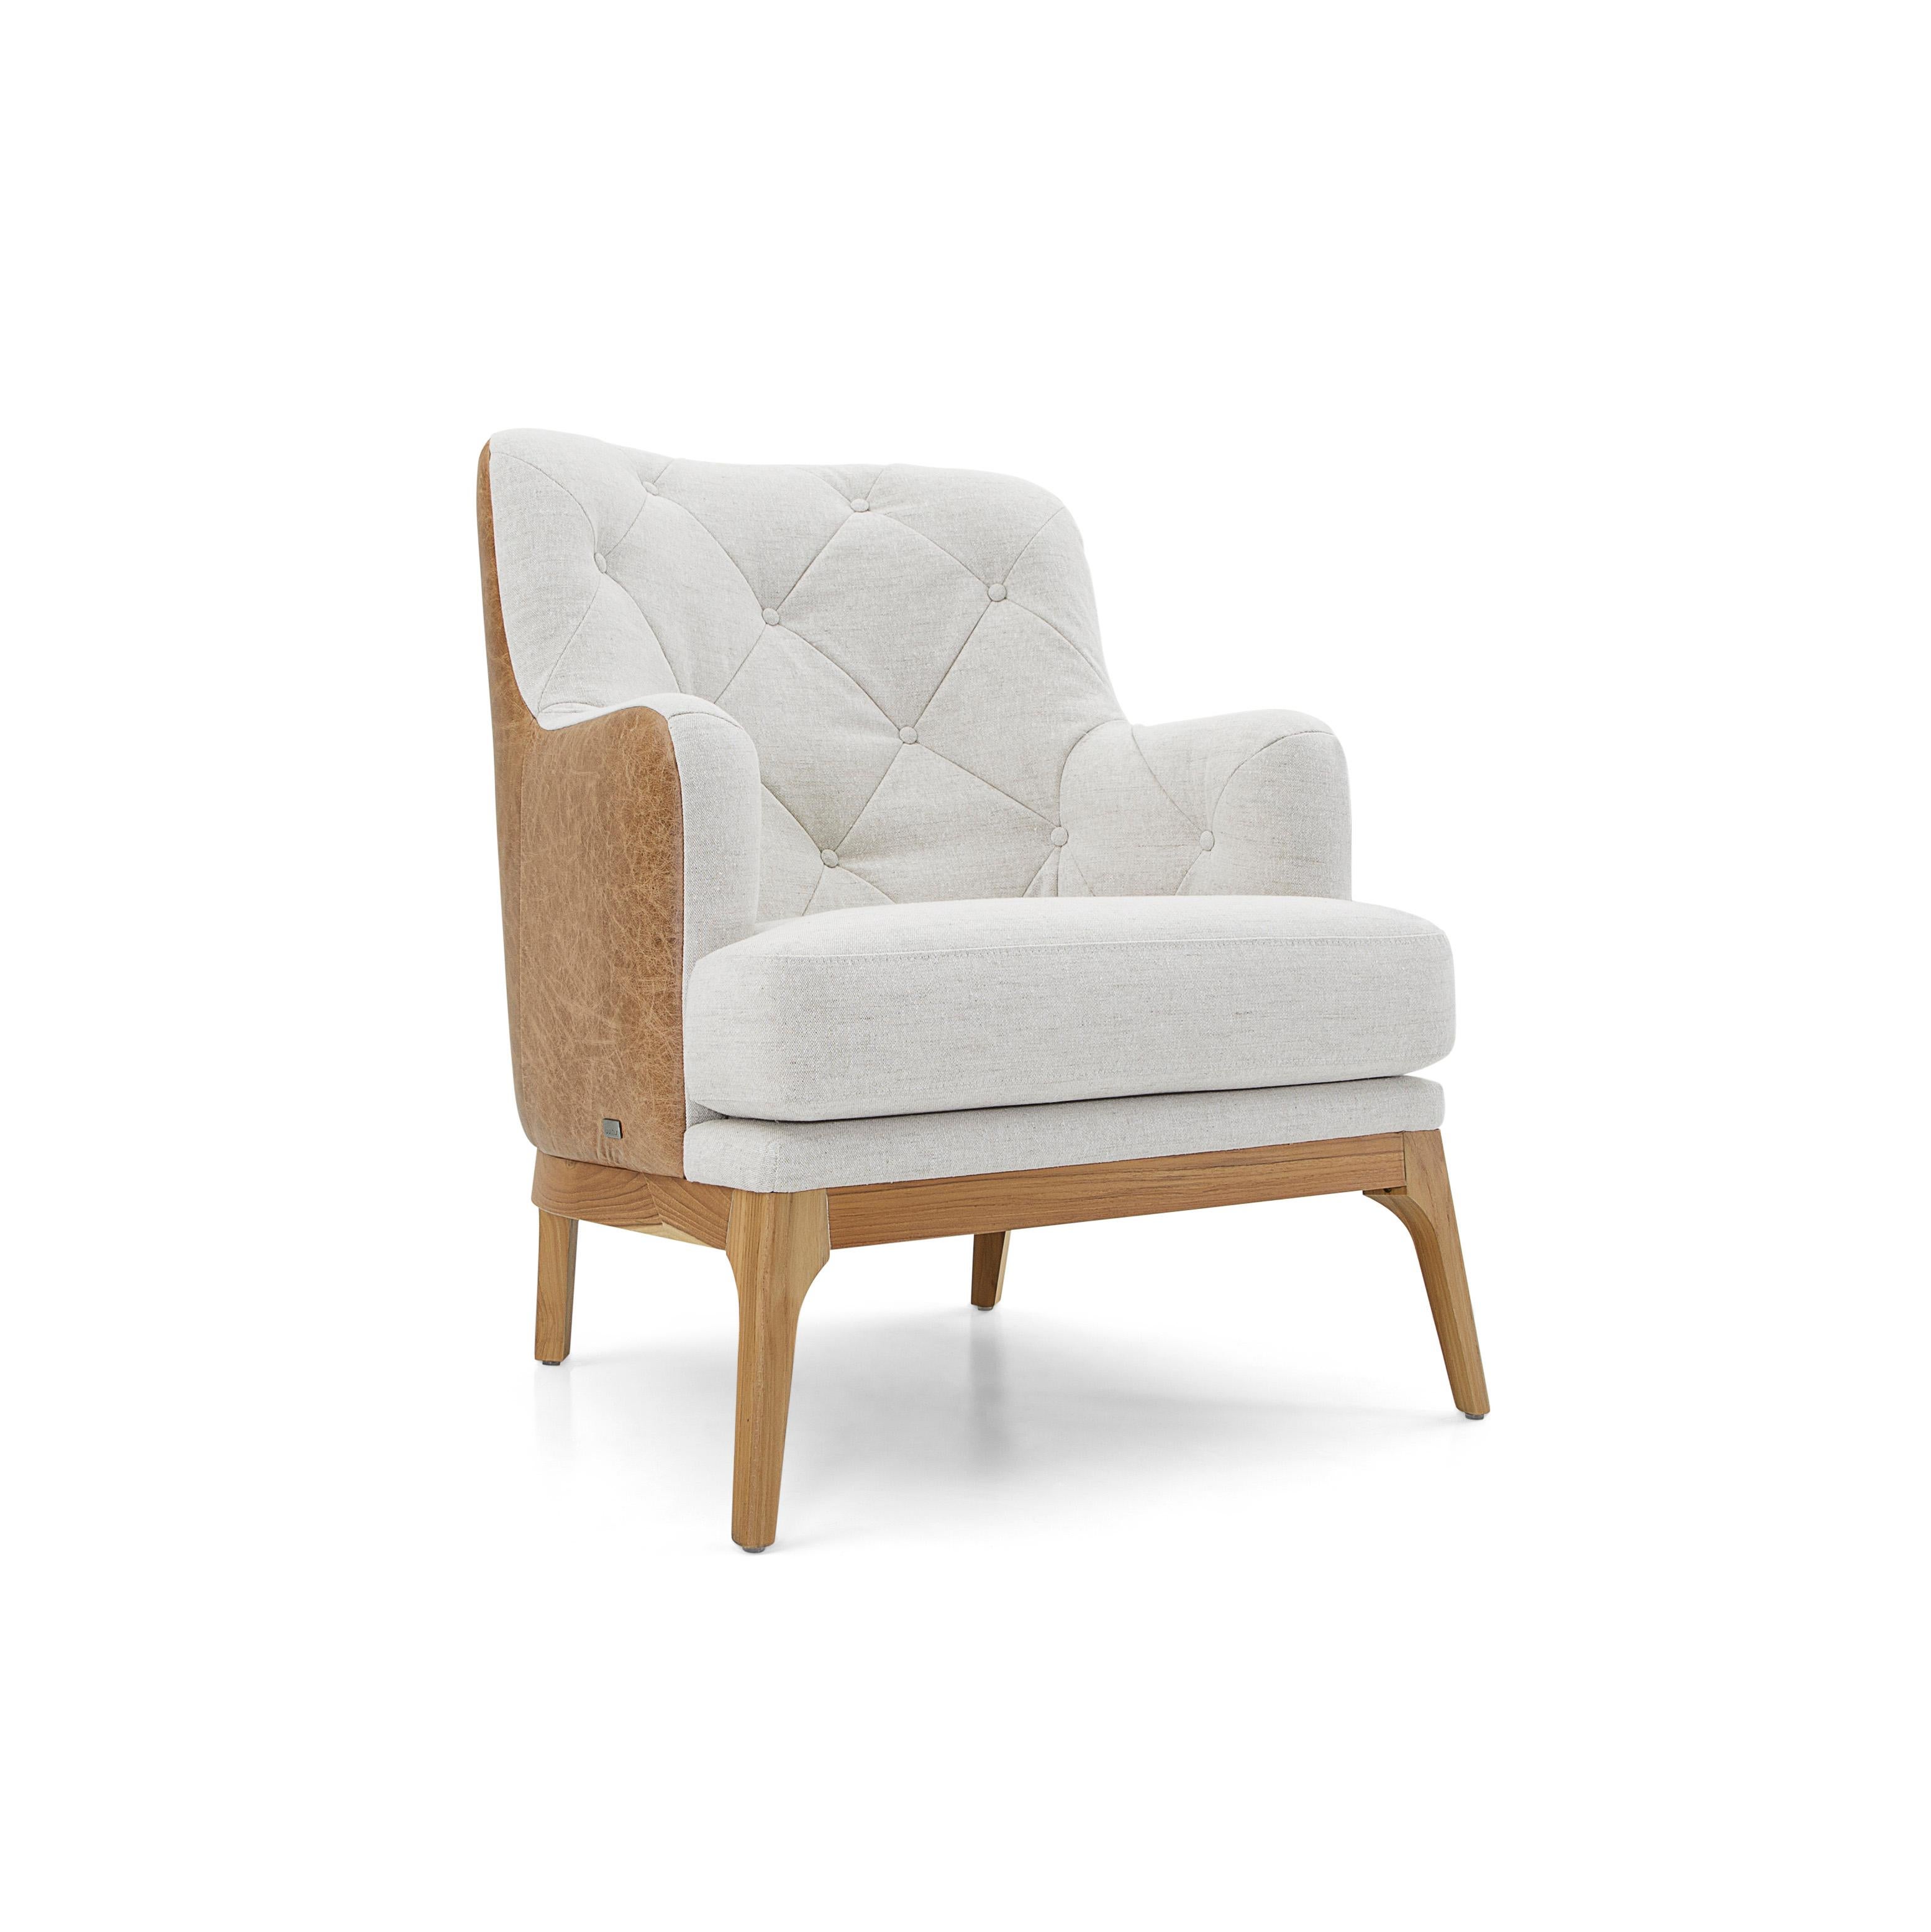 Upholstery Athos Armchair Upholstered in Leather and Fabric in Teak Wood Finish For Sale